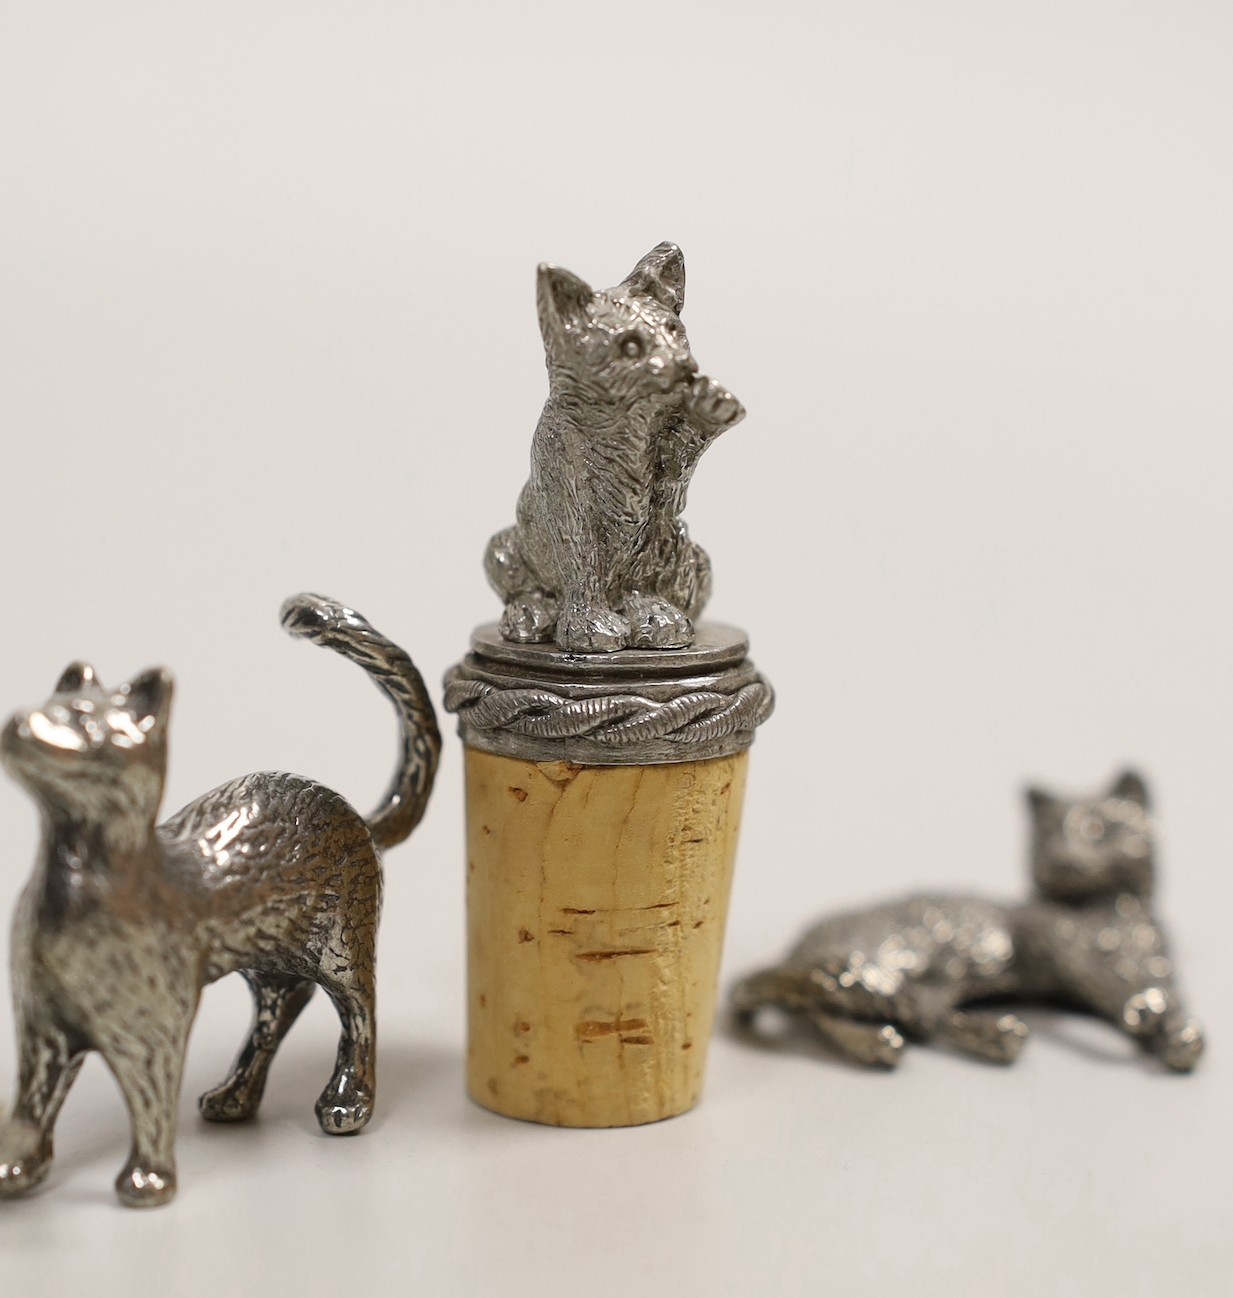 A modern silver miniature free standing model of a cat, with raised paw, London, 1995, length 37mm, together with four other base metal cats and a mouse and a cork stopper with cat finial.